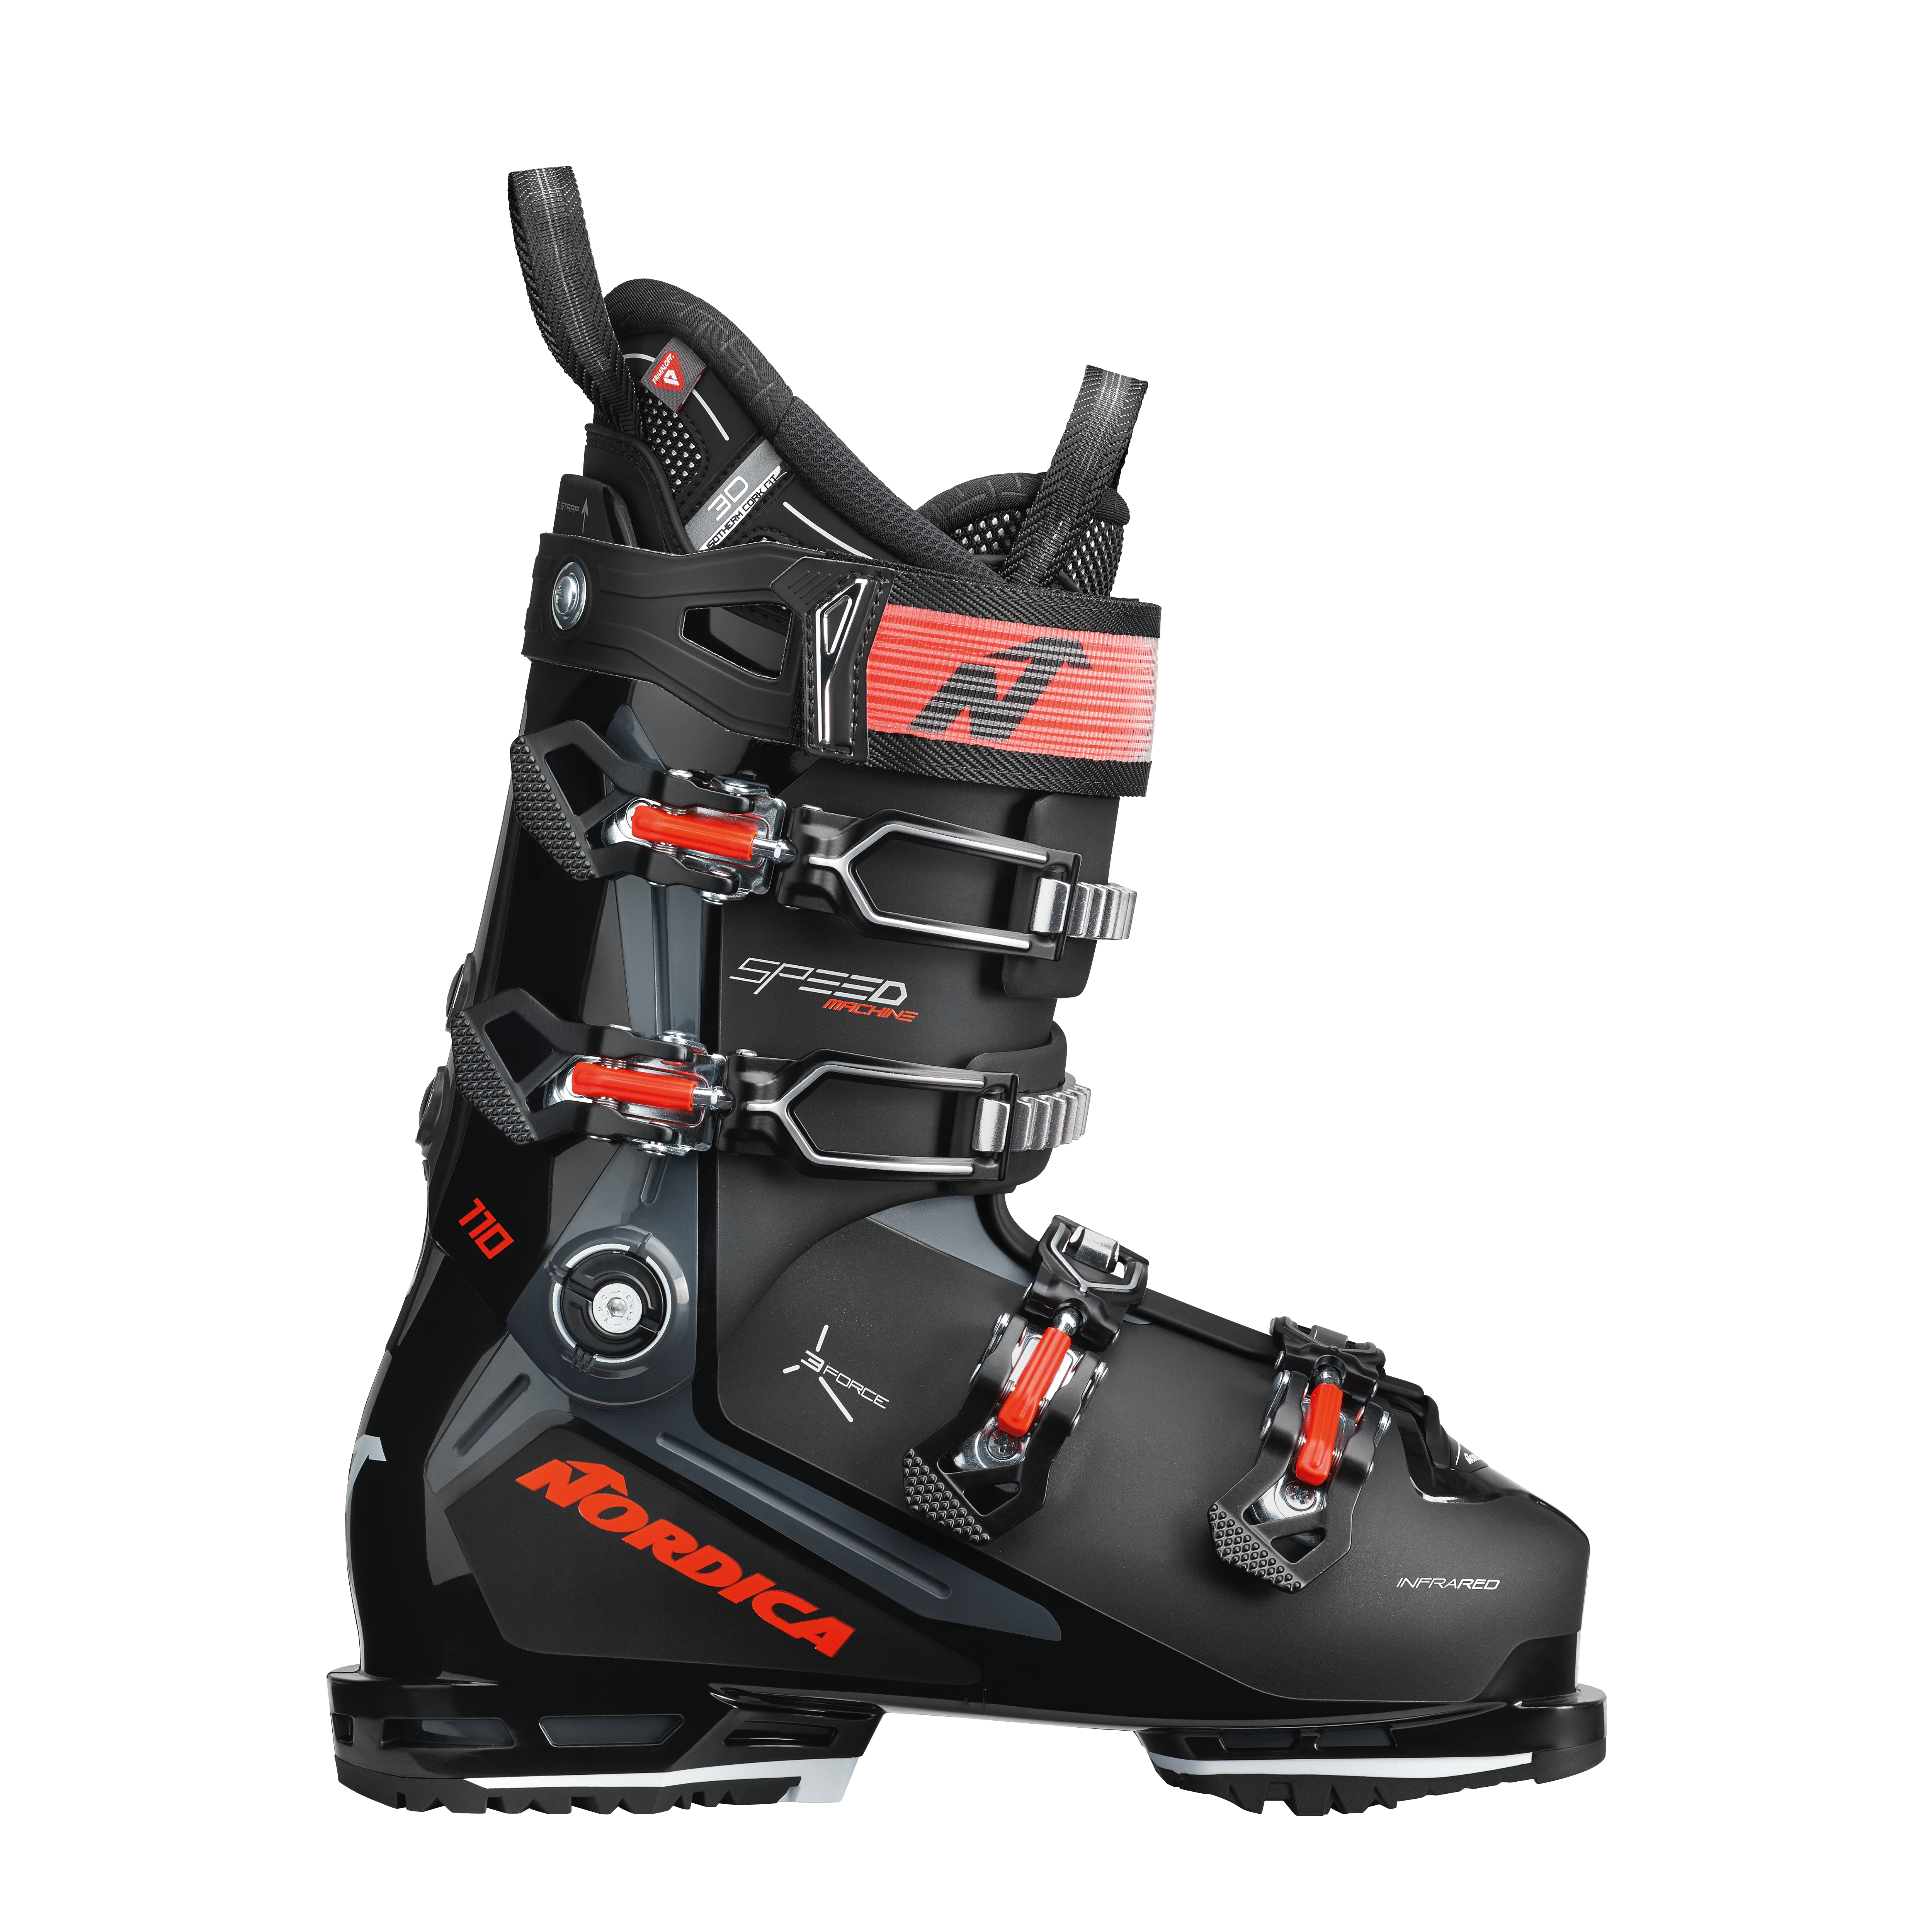 Sportmachine 3 110 (GW) - Nordica - Skis and Boots – Official website